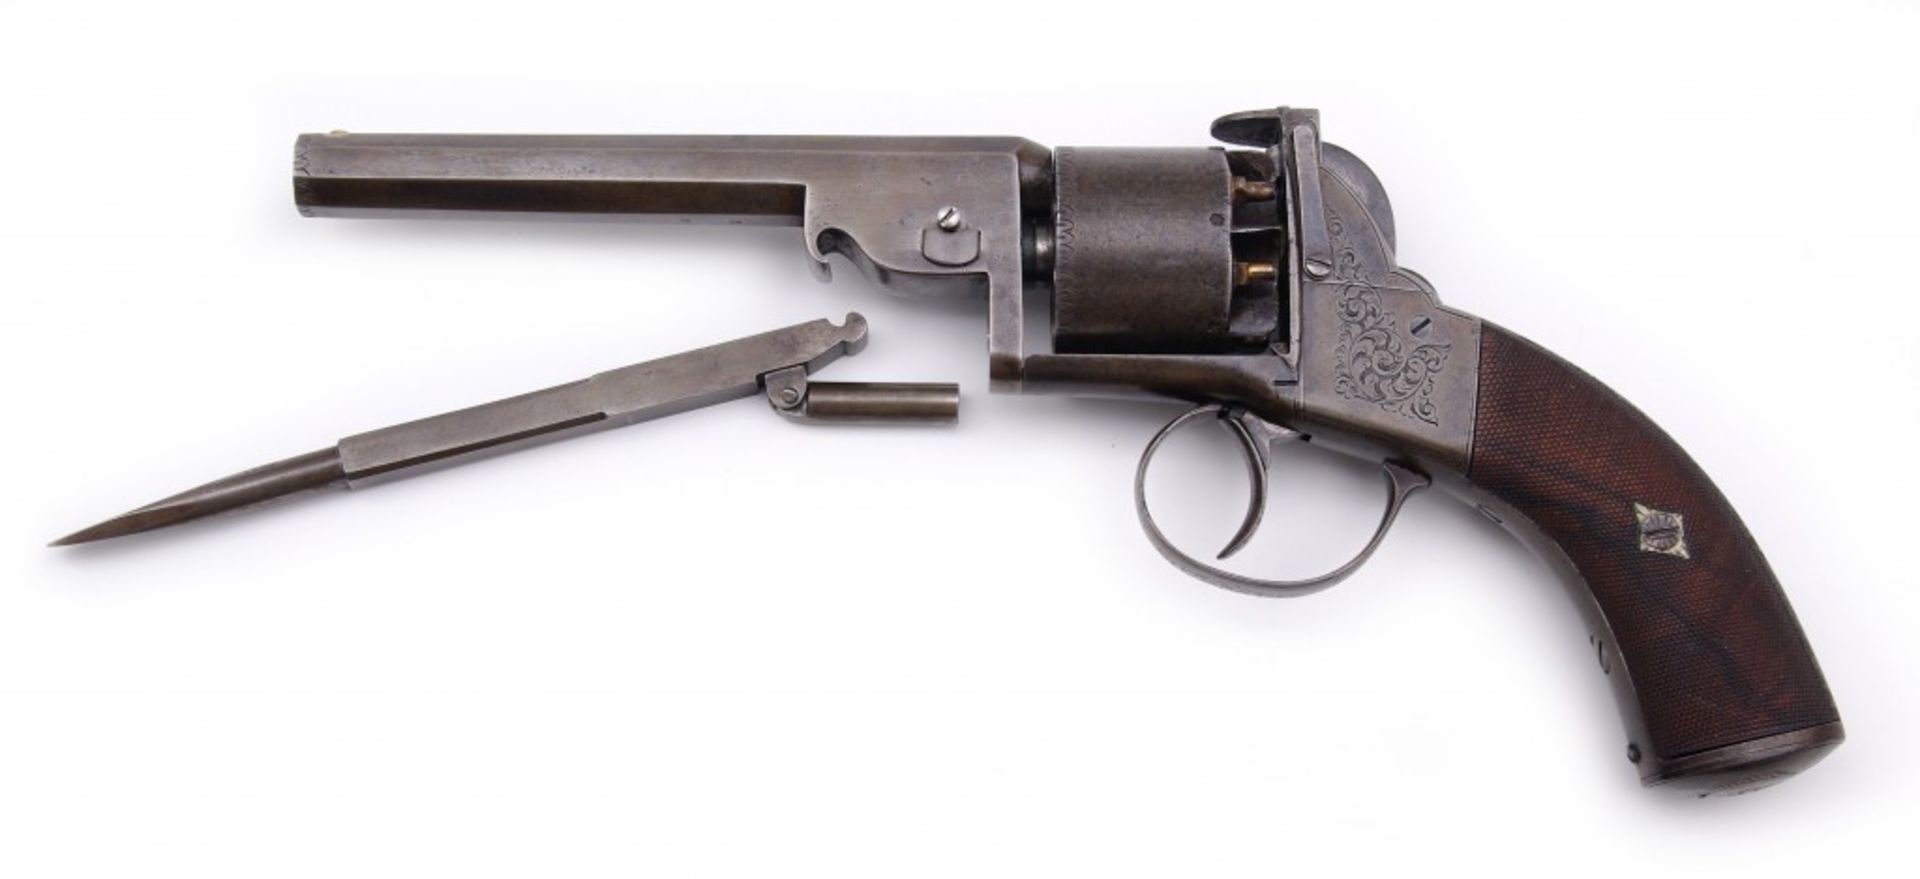 A Cased Webley-System Open-Top Percussion Revolver - Image 4 of 7